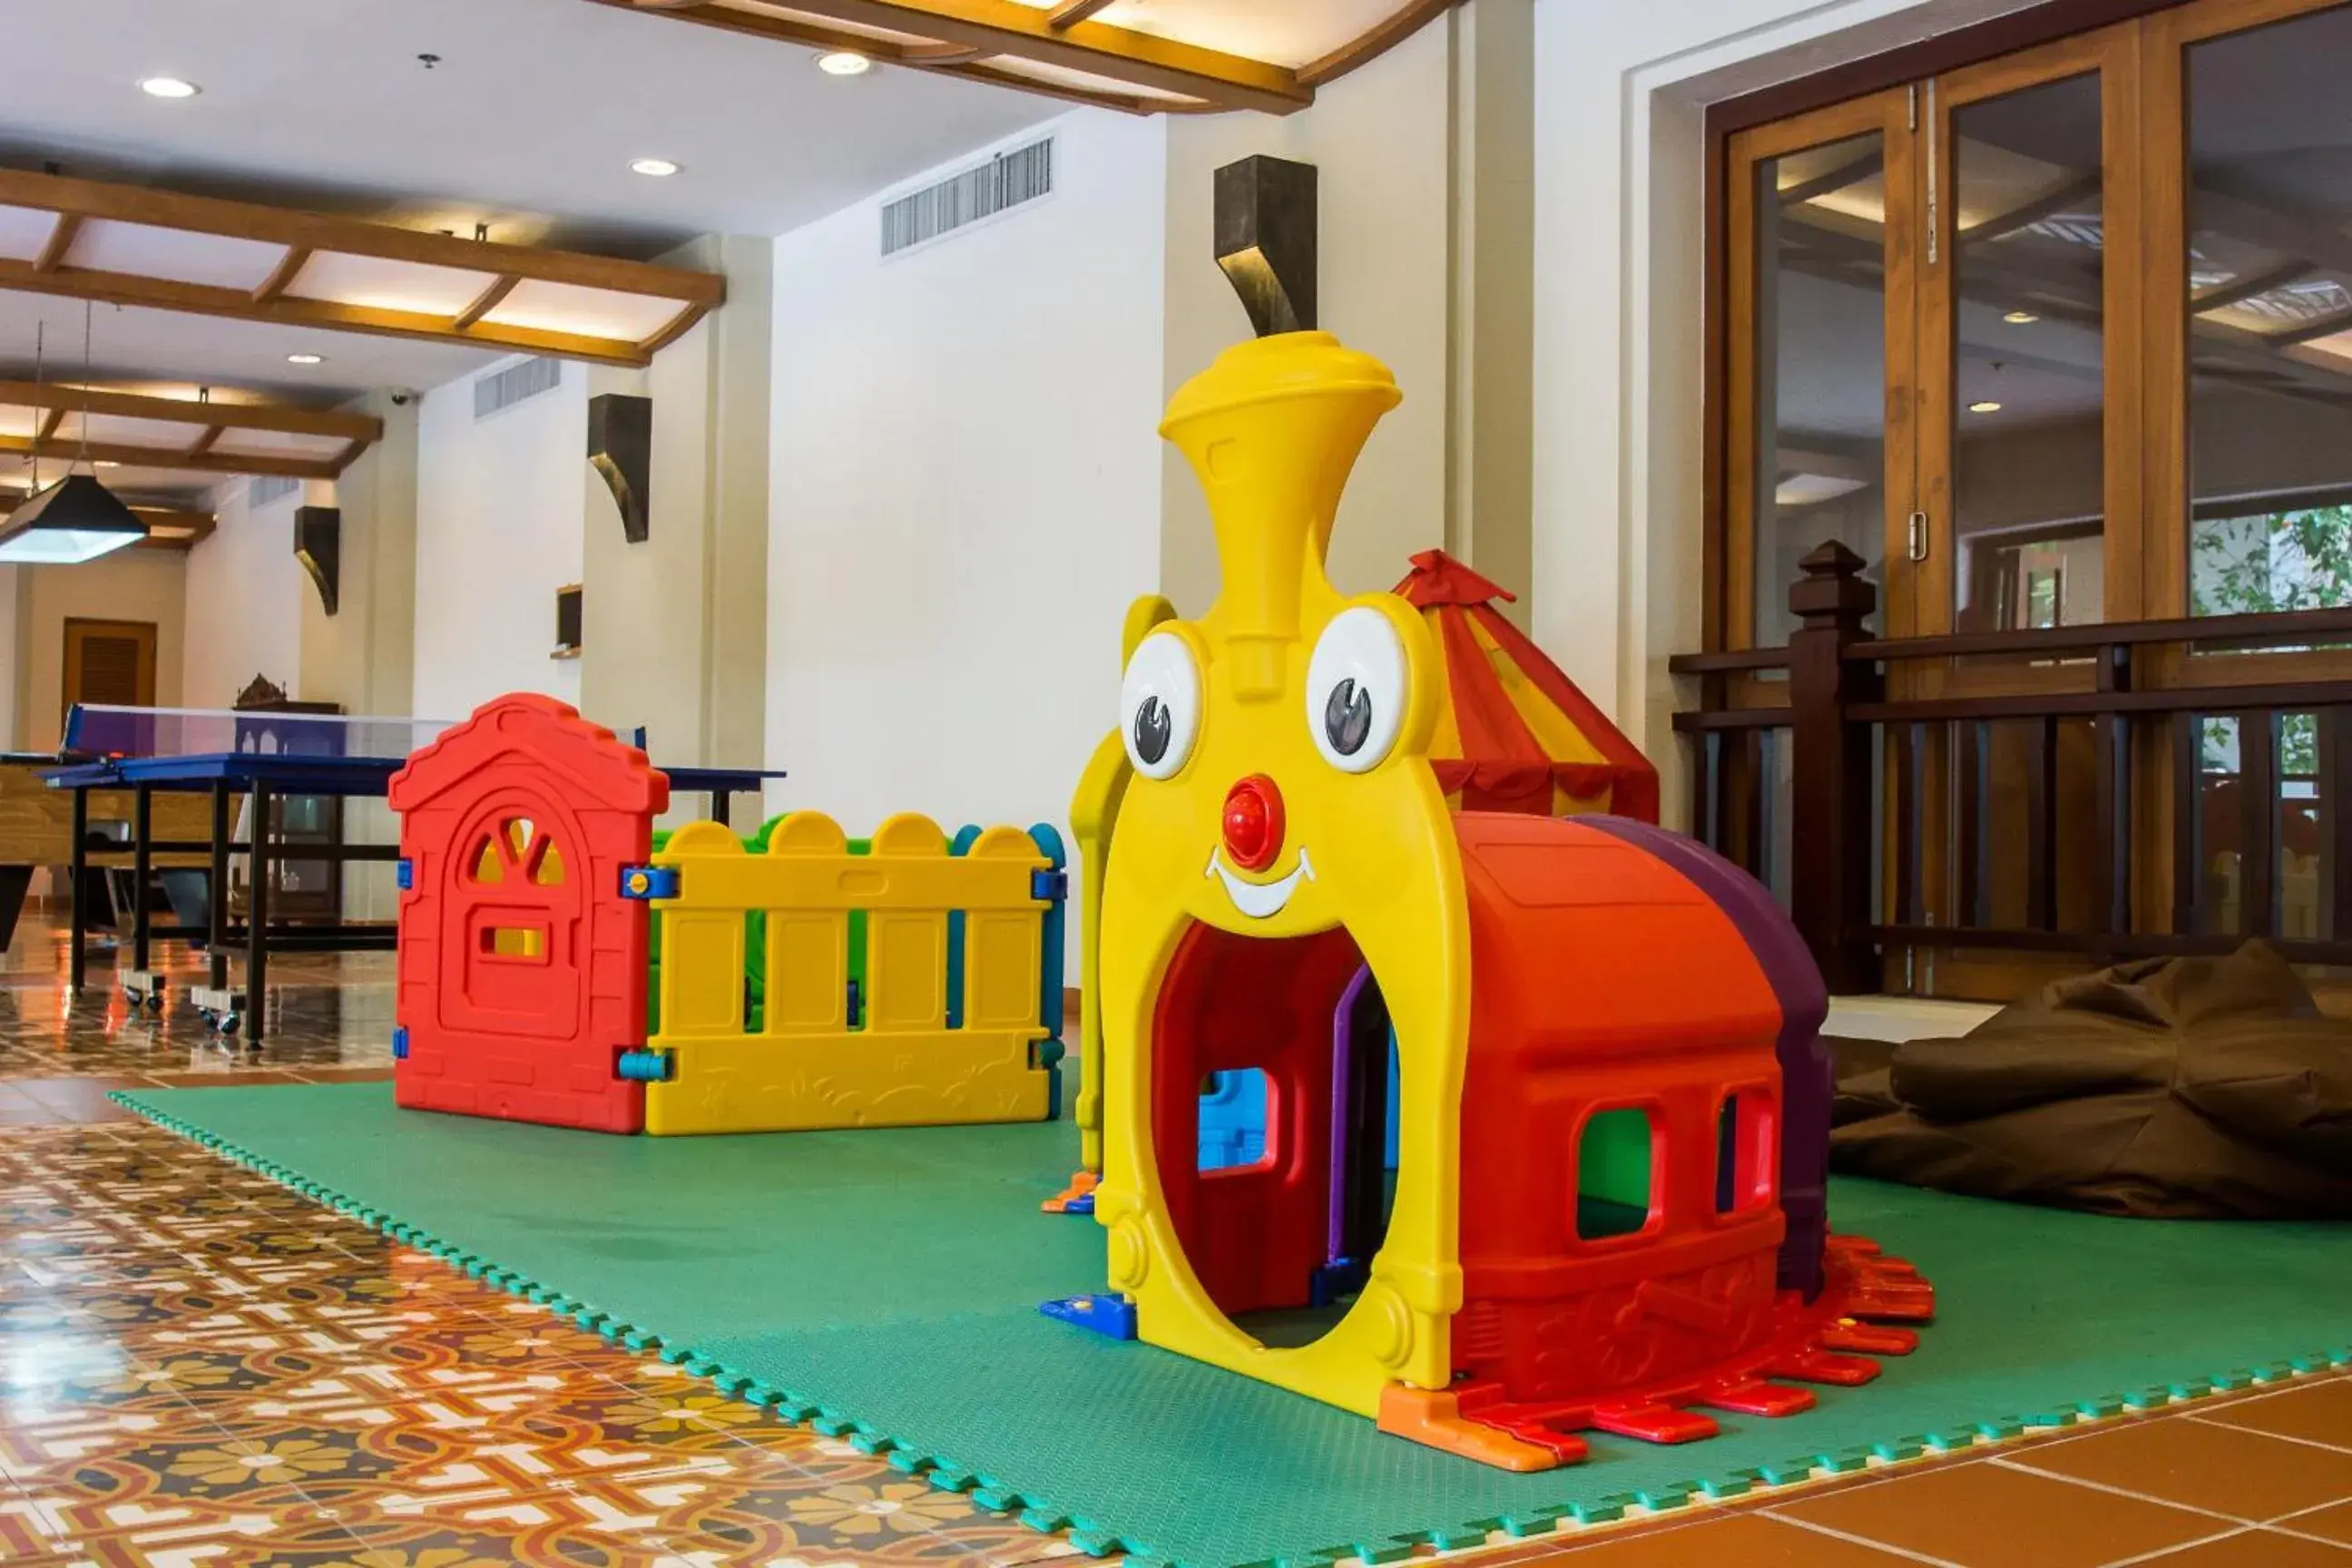 Kids's club, Children's Play Area in Dor-Shada Resort By The Sea